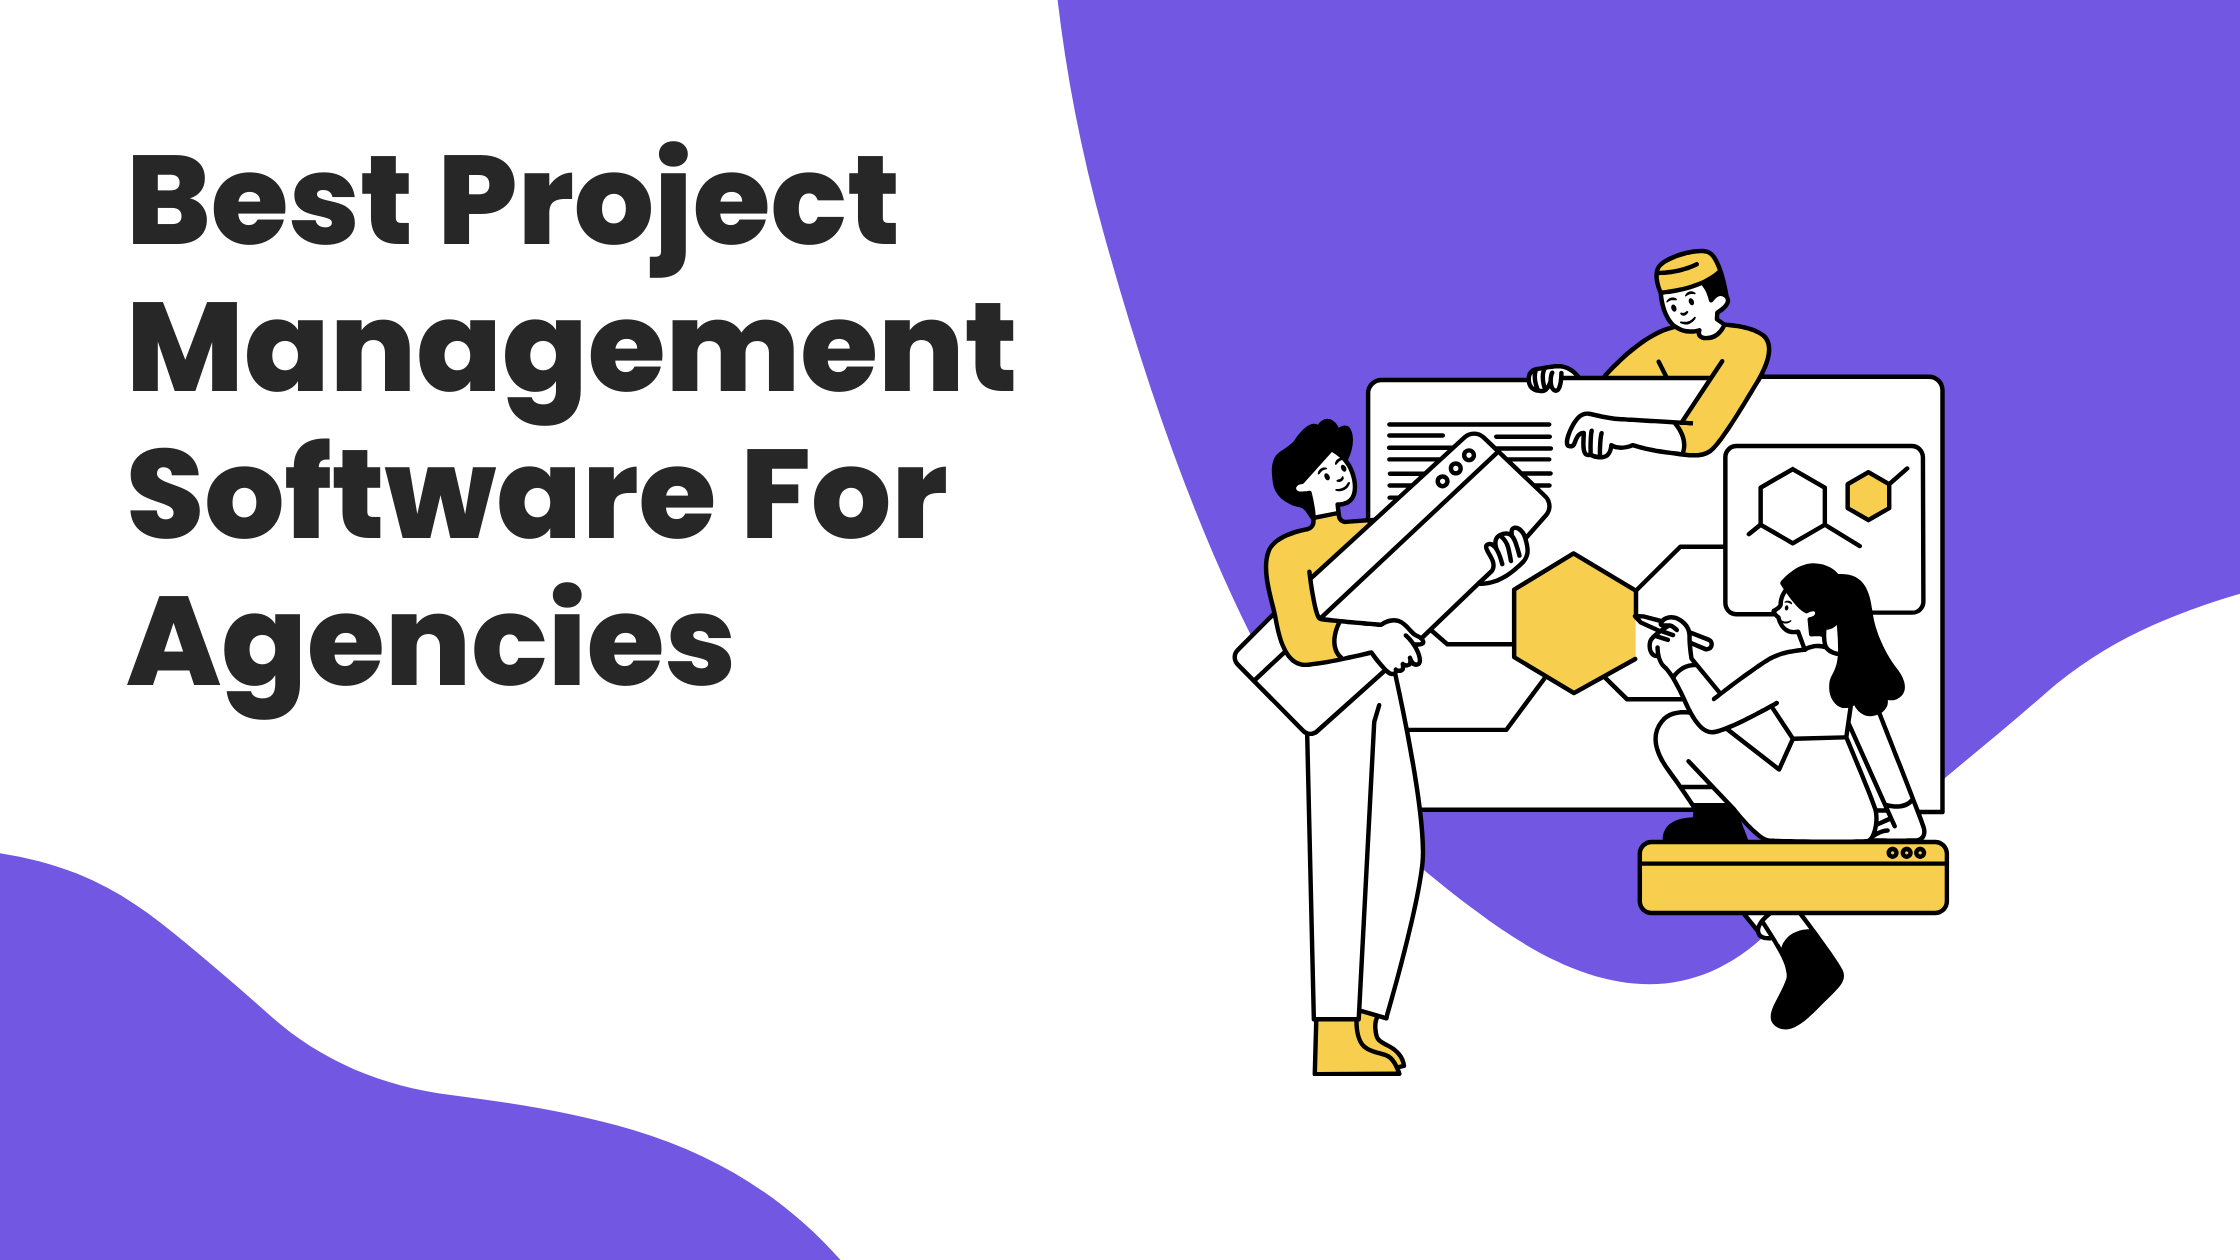 Best Project Management Software For Agencies